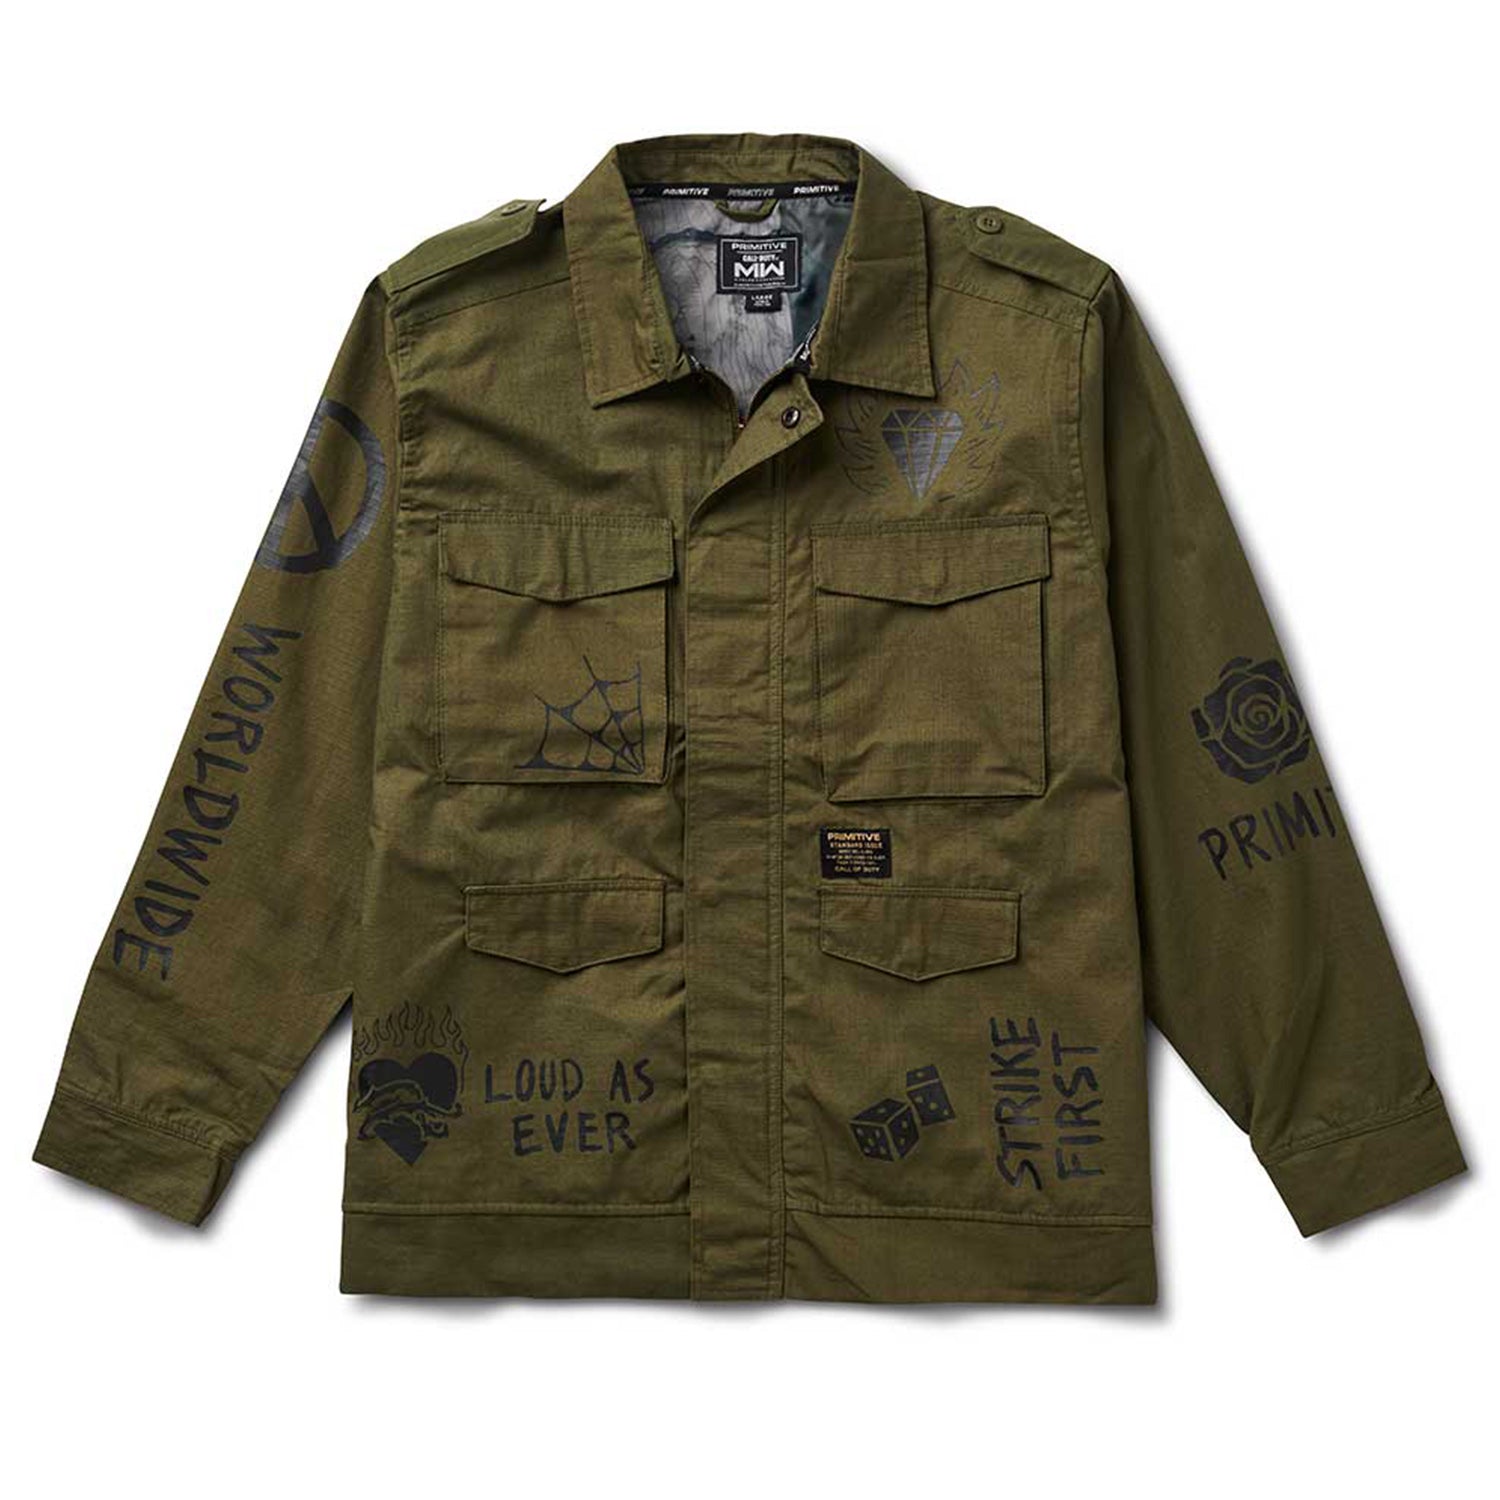 Call of Duty Military Green Task Force Jacket - Front View